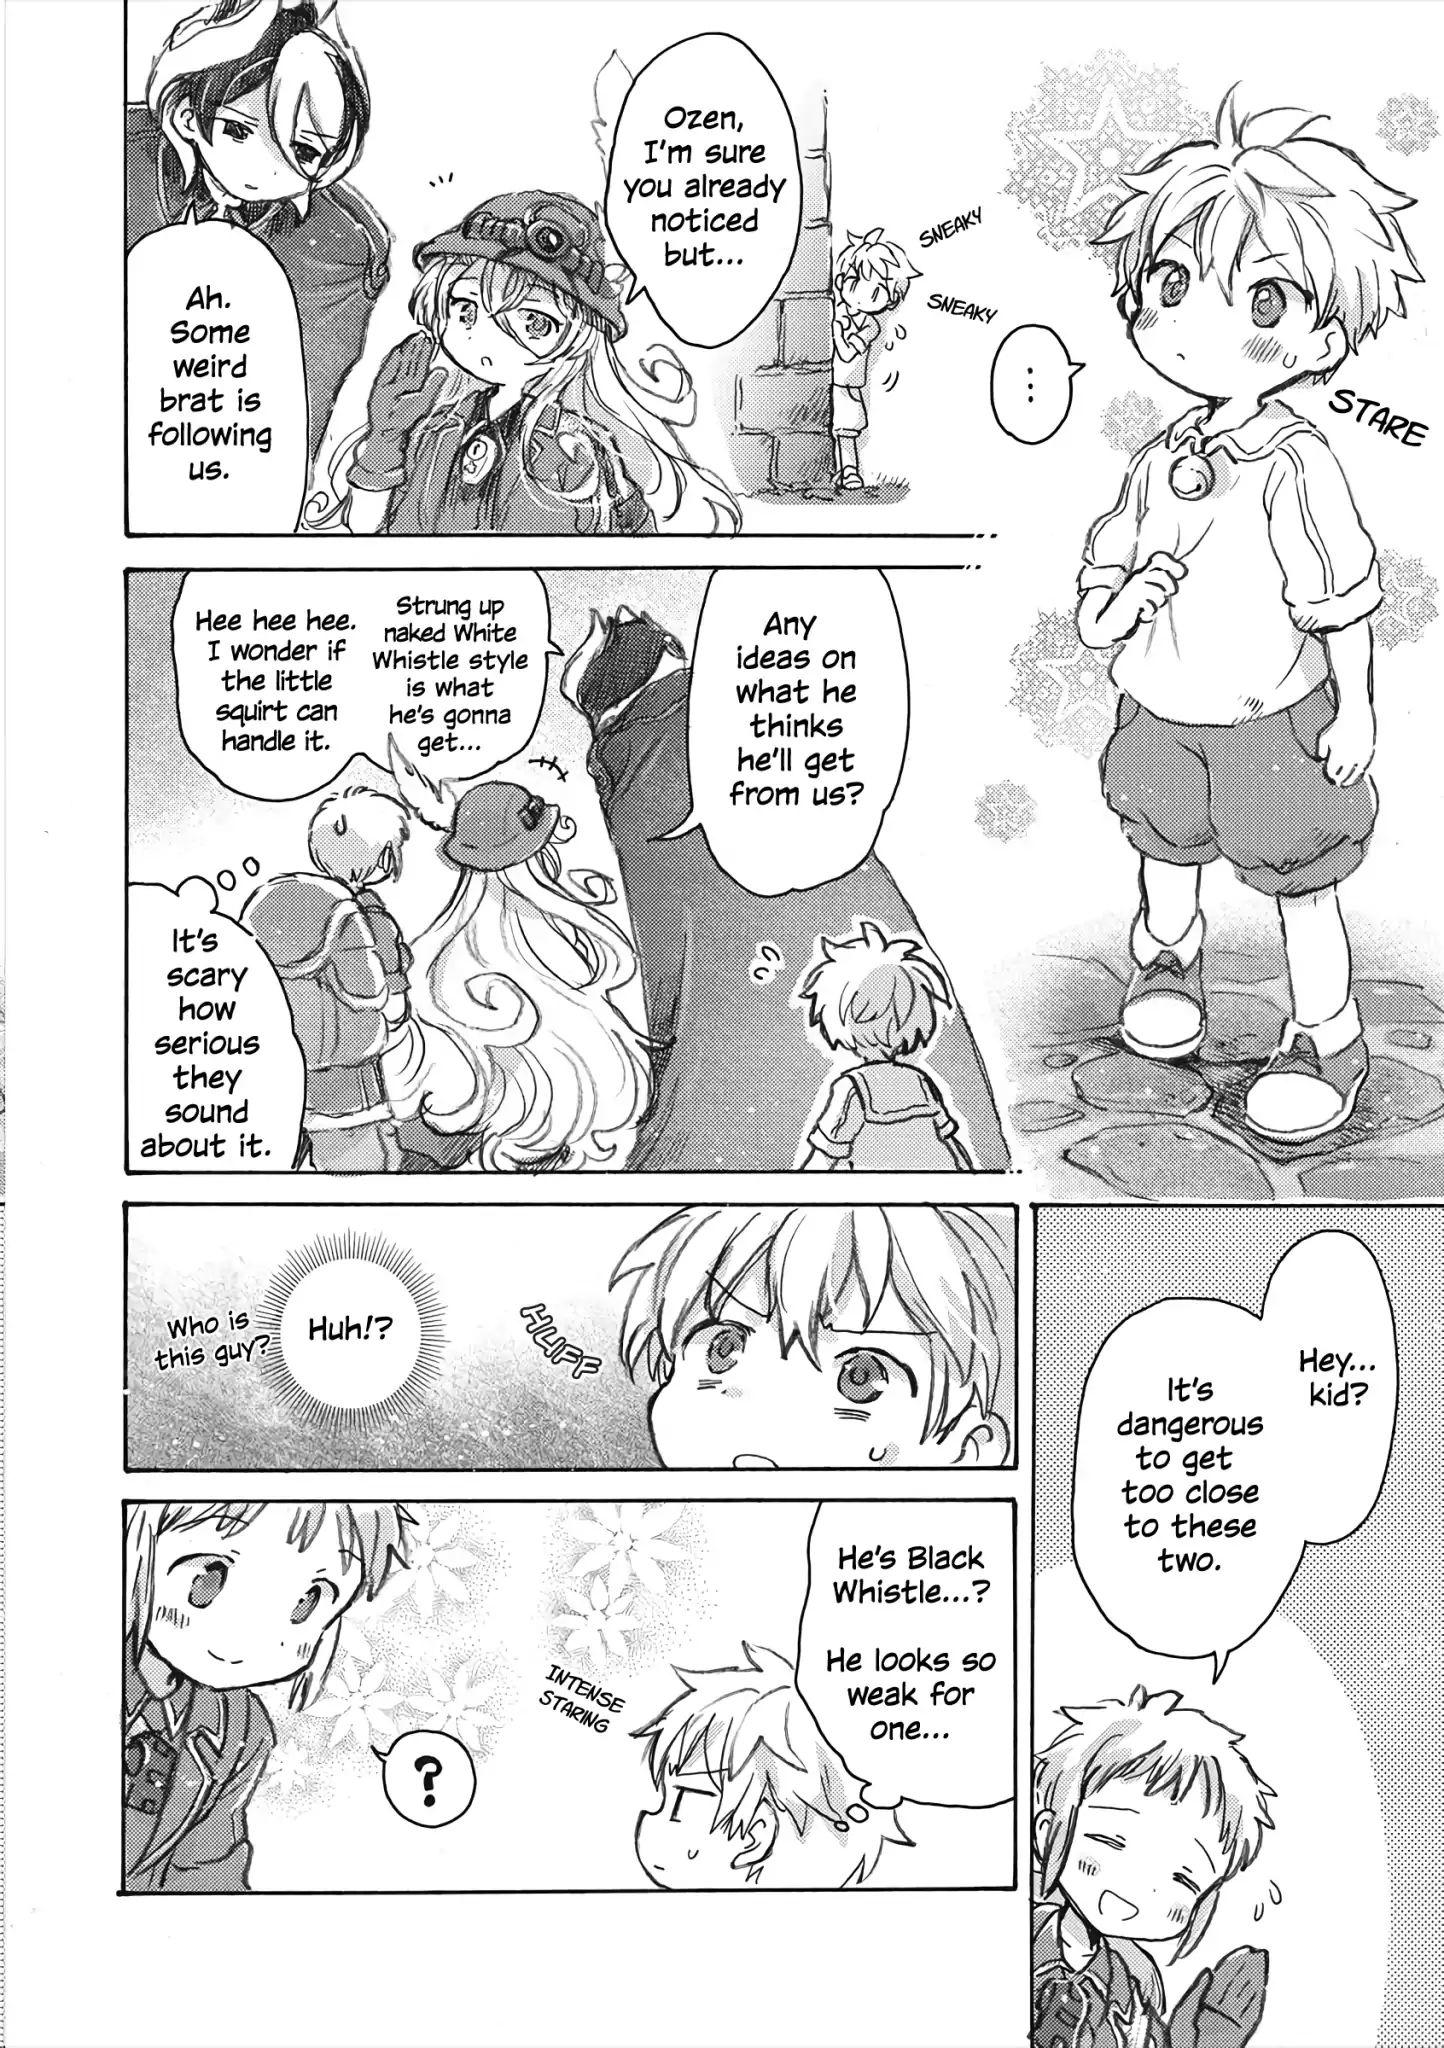 Made in Abyss Official Anthology - by Tsukushi, Akihito